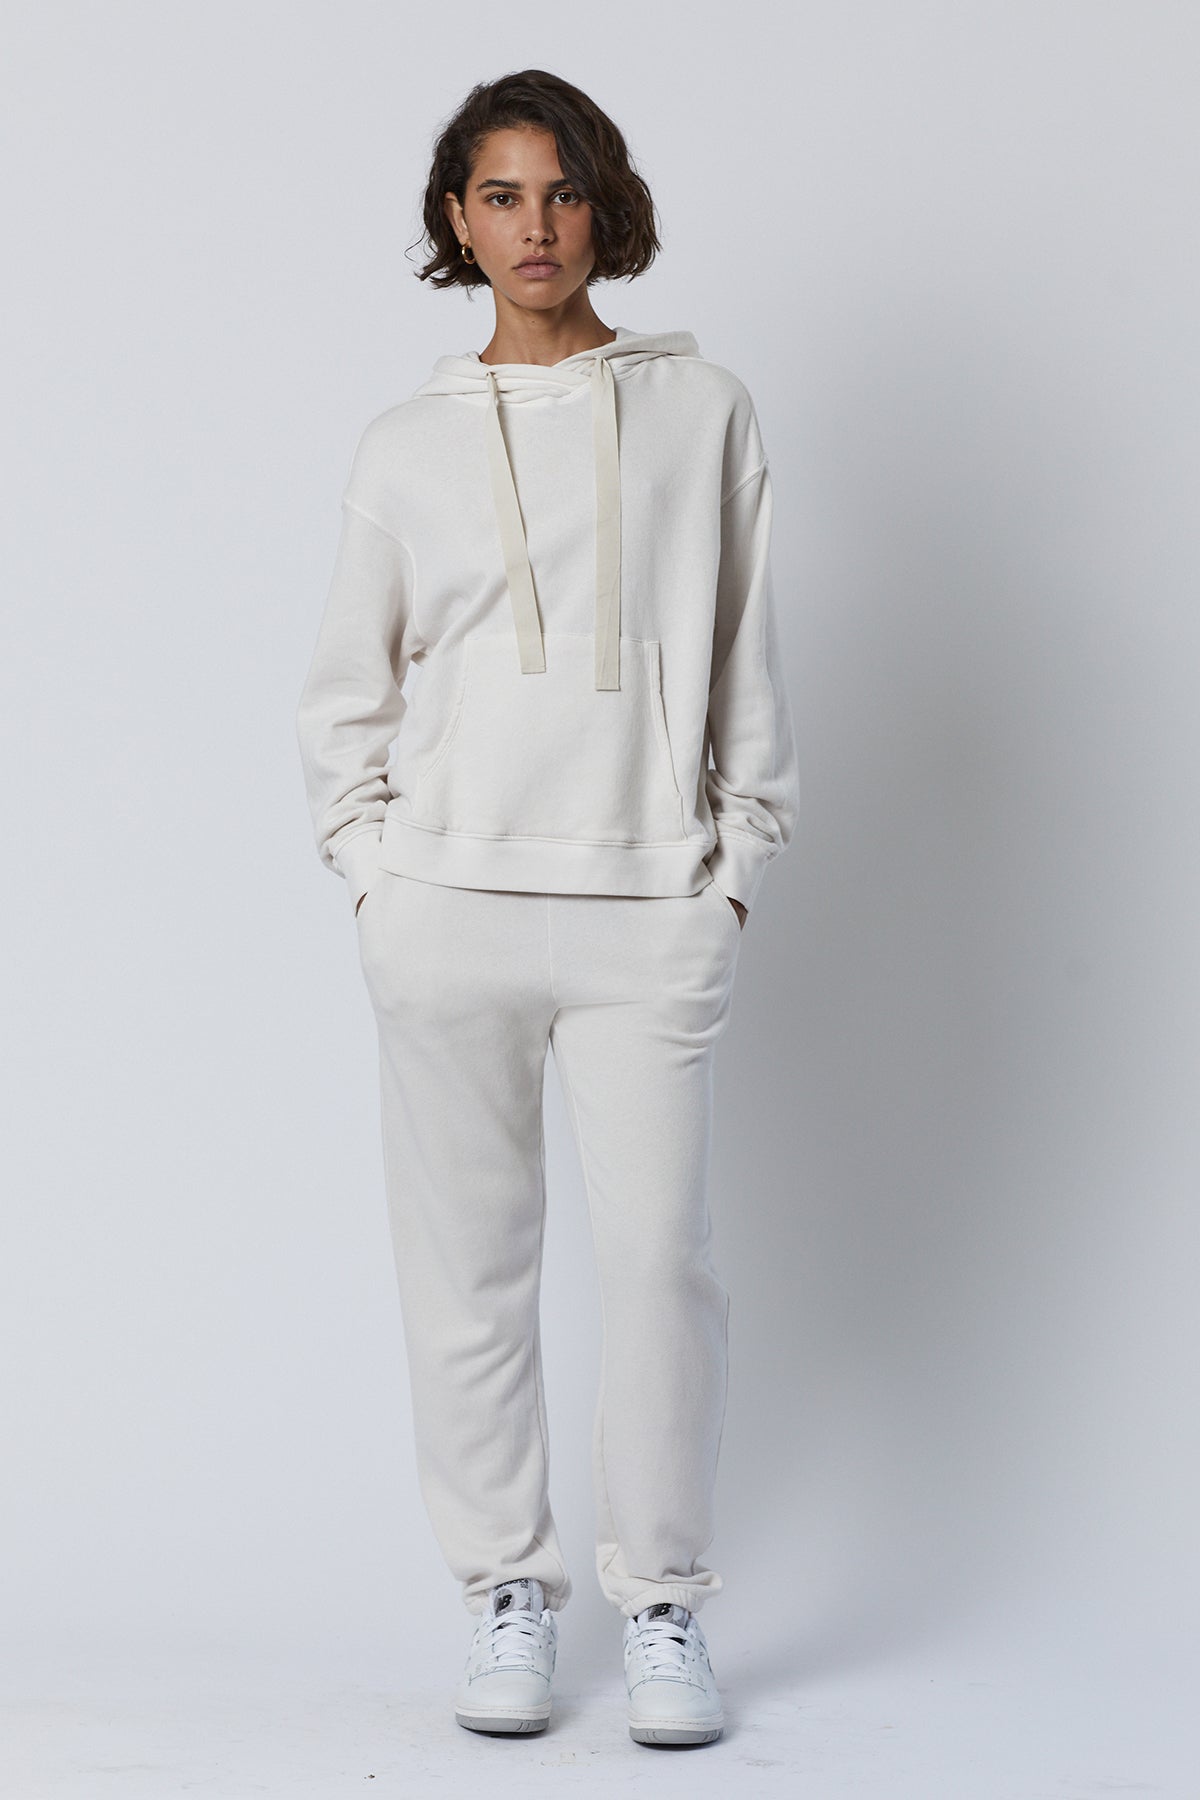 Ojai Hoodie in beach with Zuma Sweatpant full length front-26007164715201